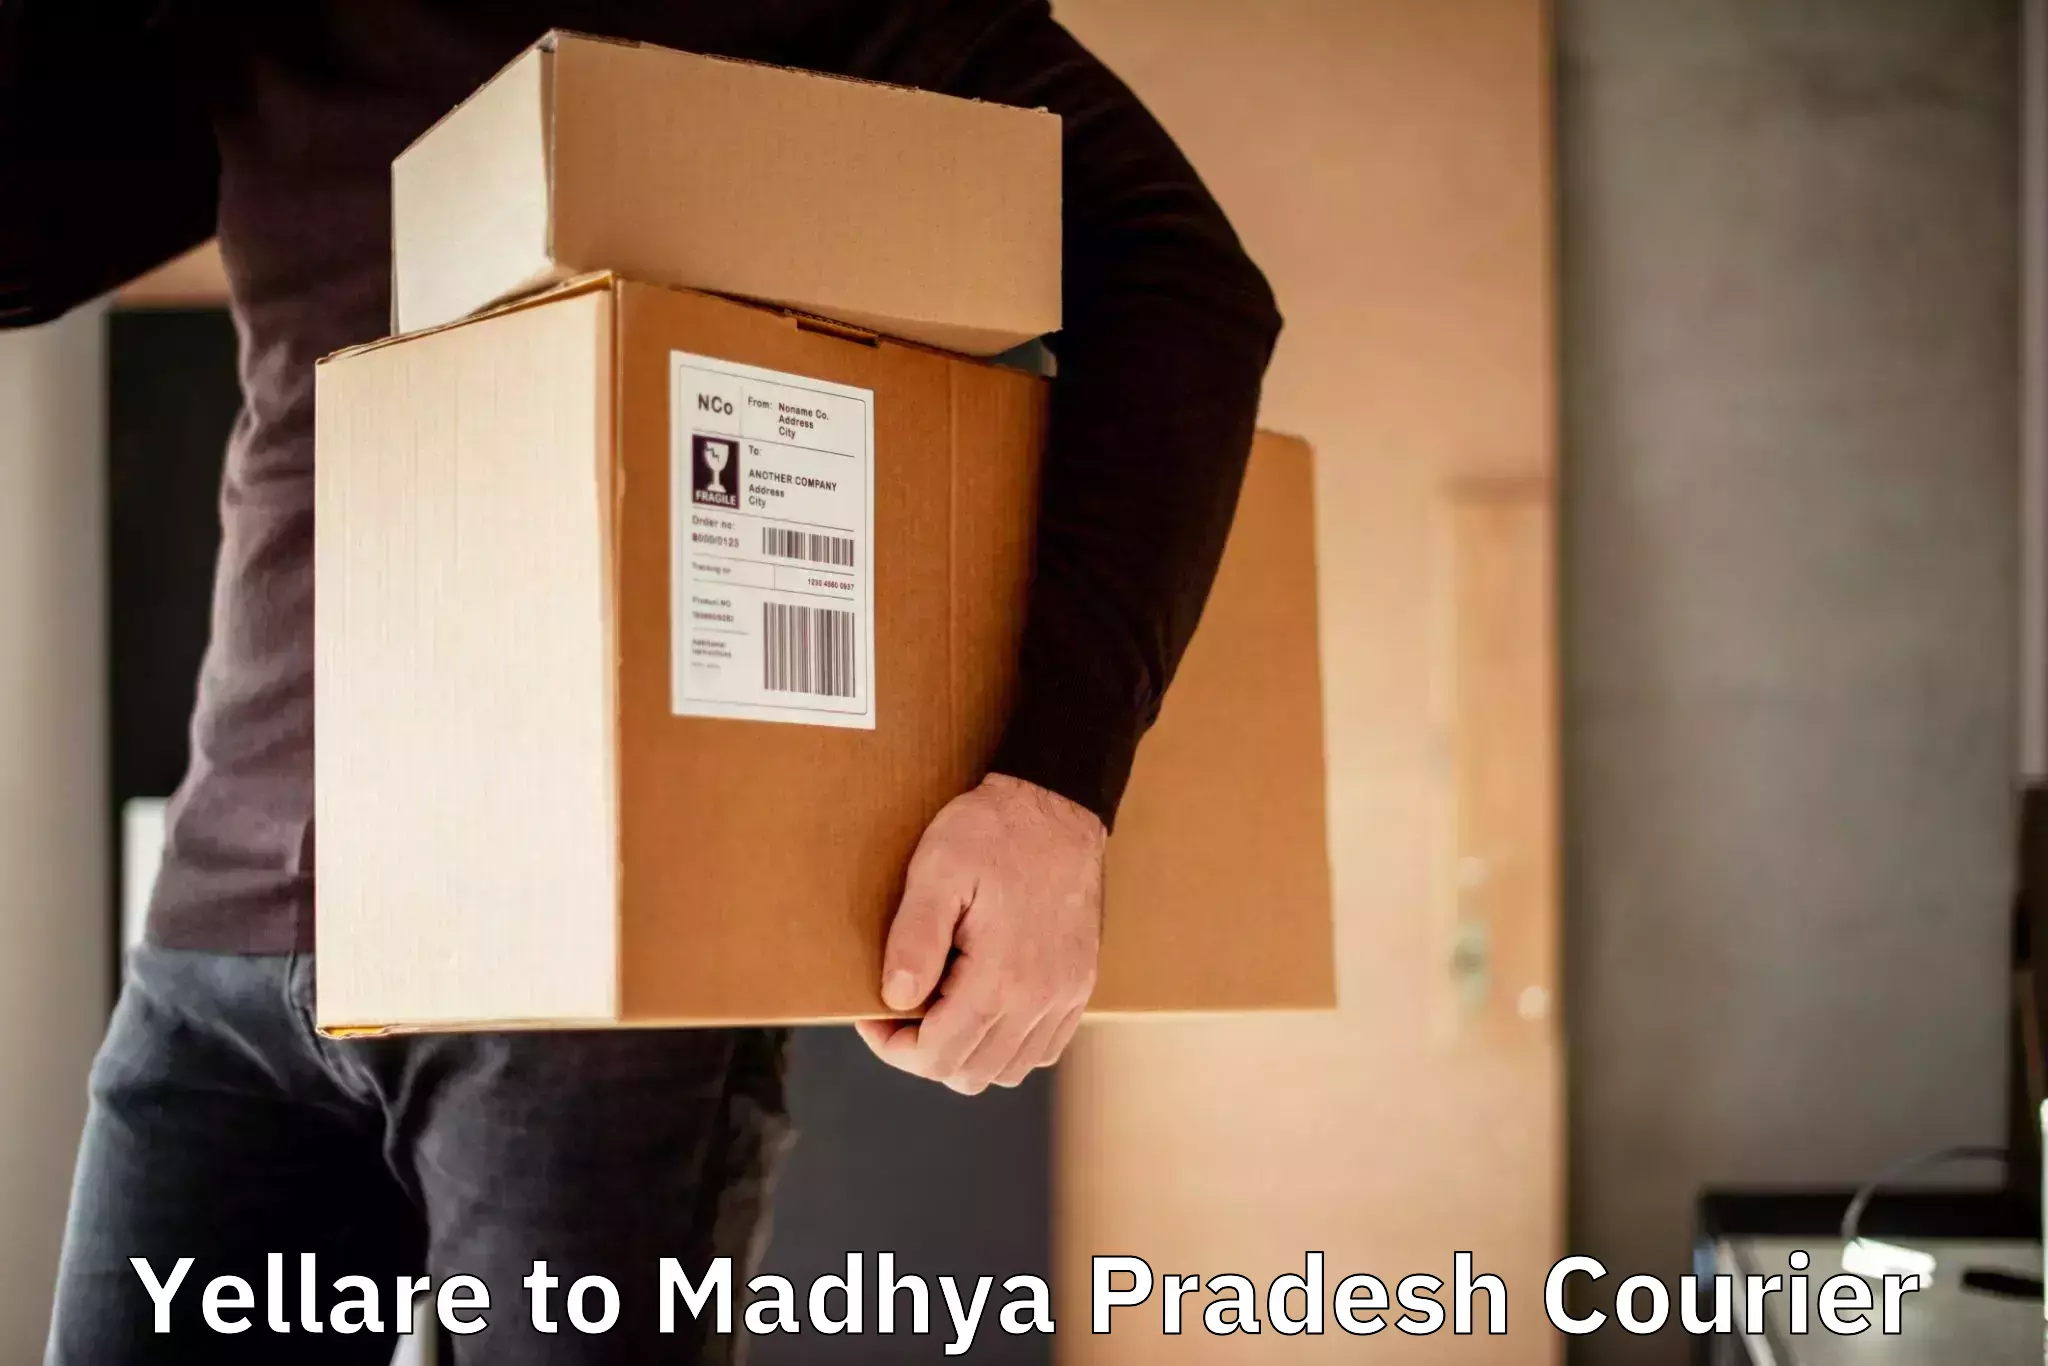 End-to-end delivery Yellare to Madhya Pradesh